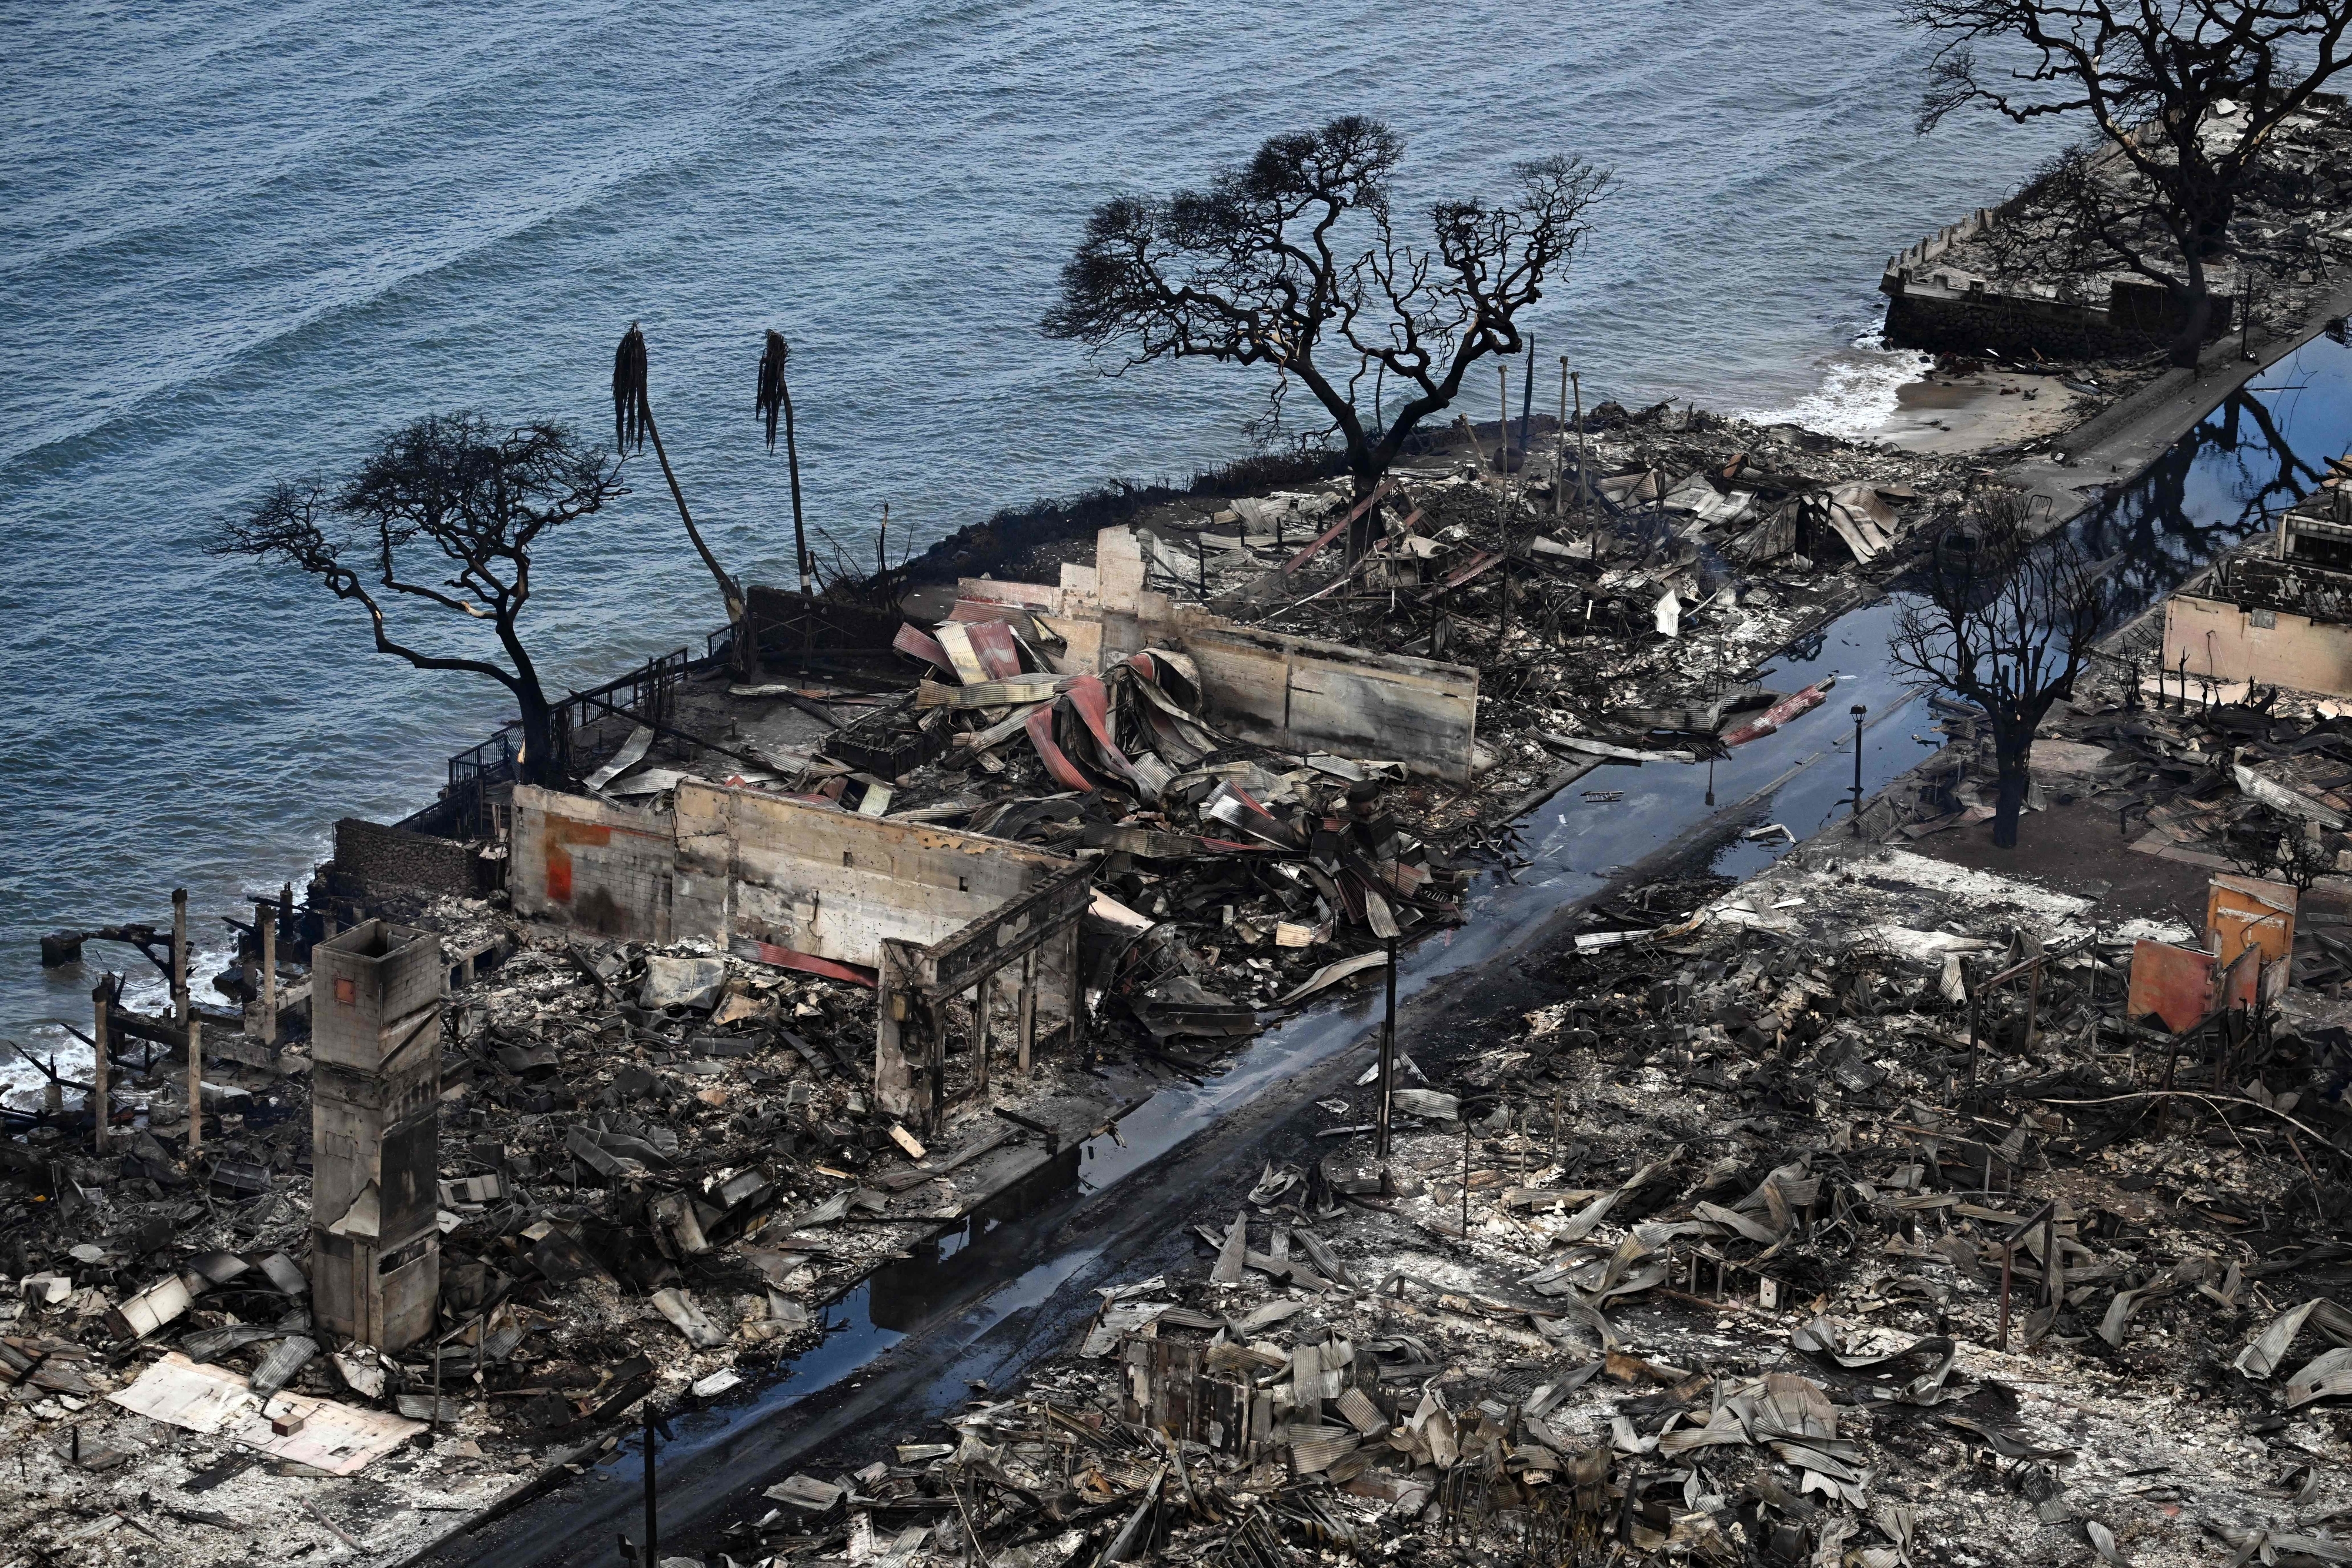 Destroyed homes next to the ocean